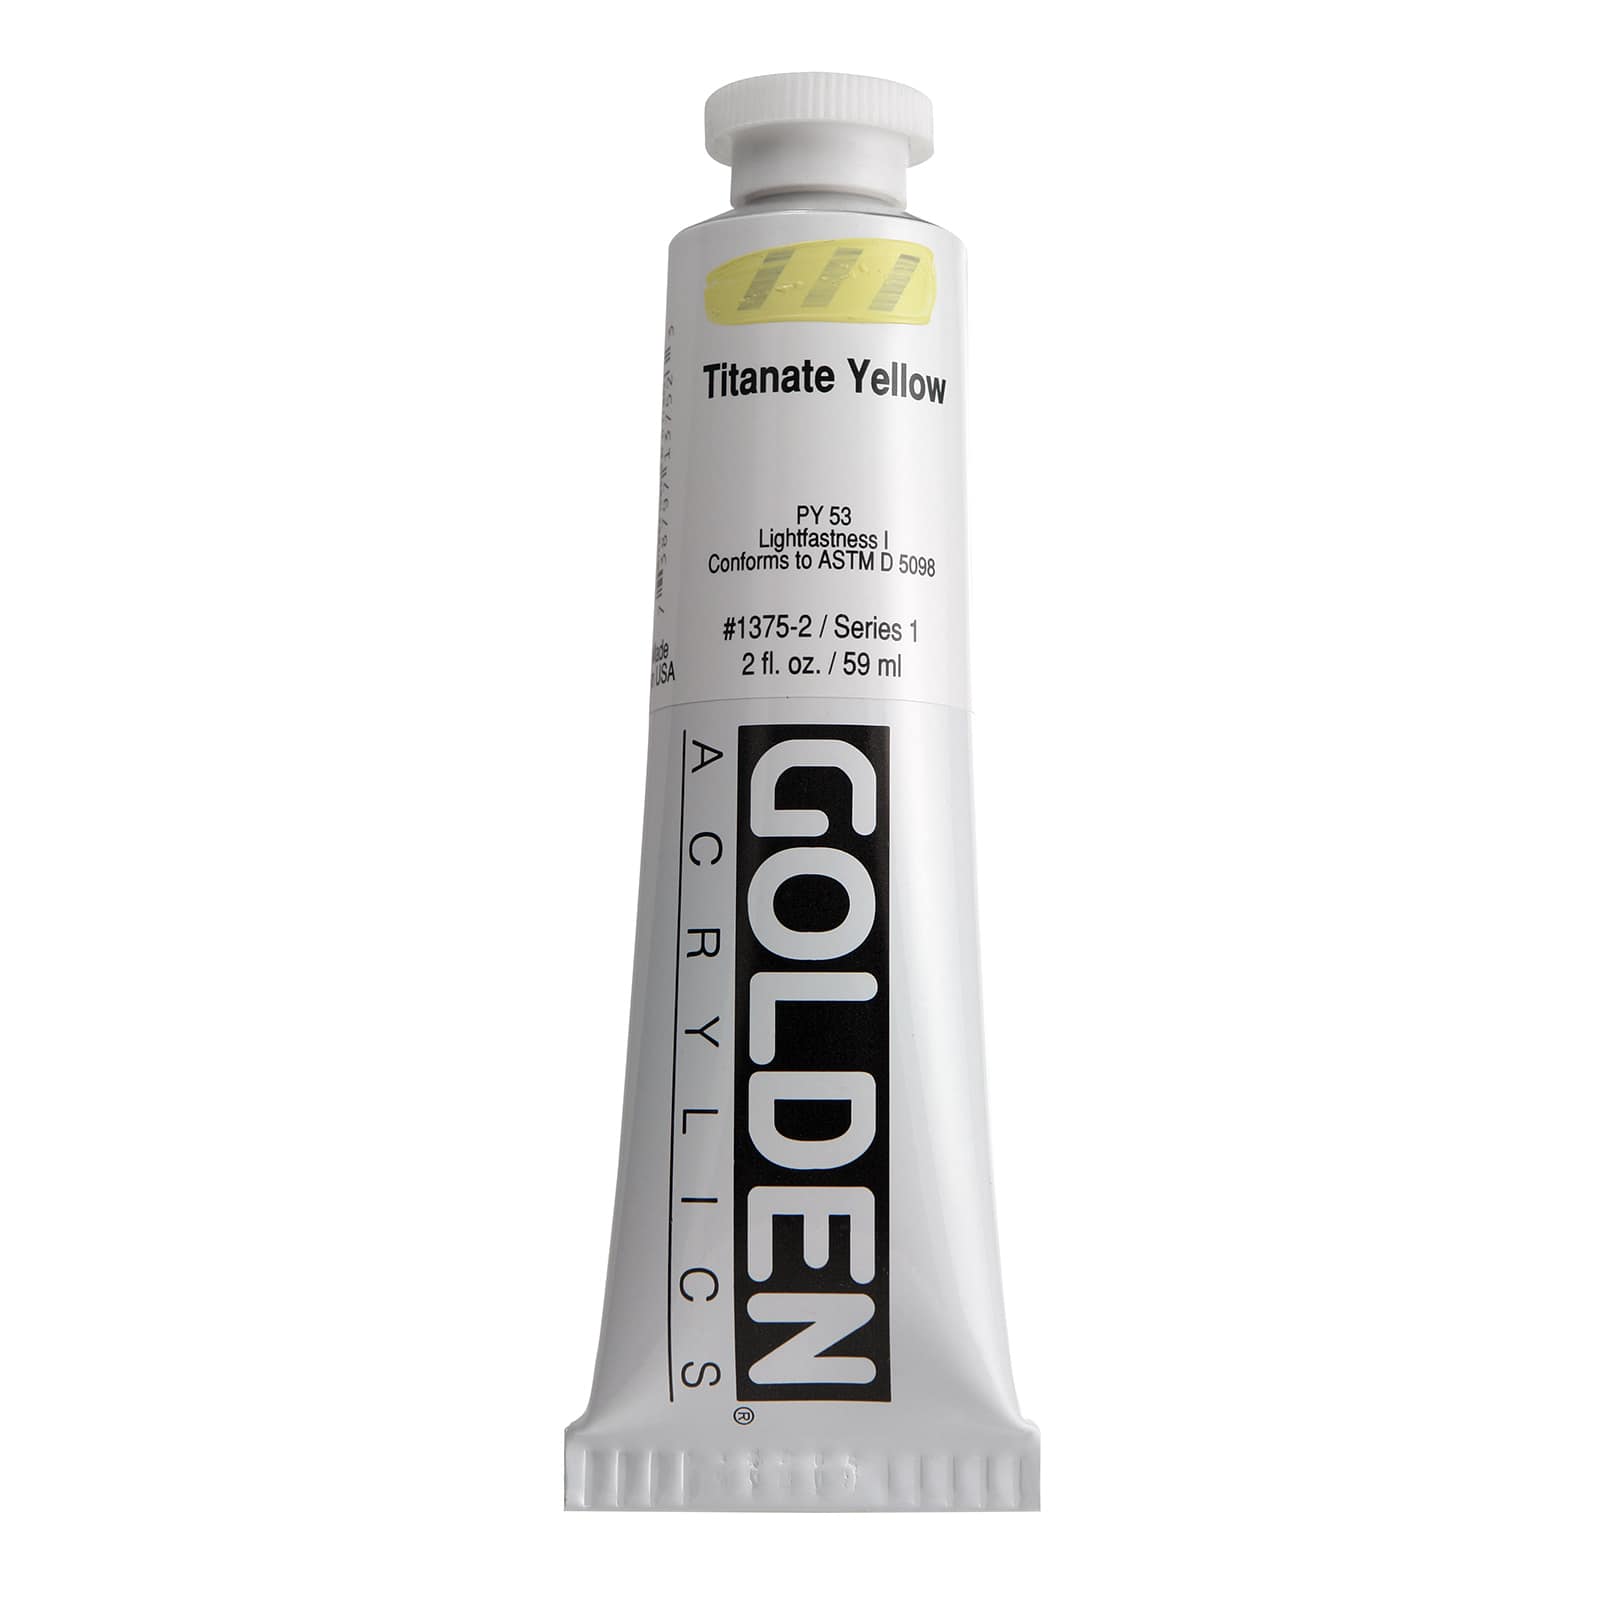 Get to know your Golden Mediums! — Wallack's Art Supplies & Framing